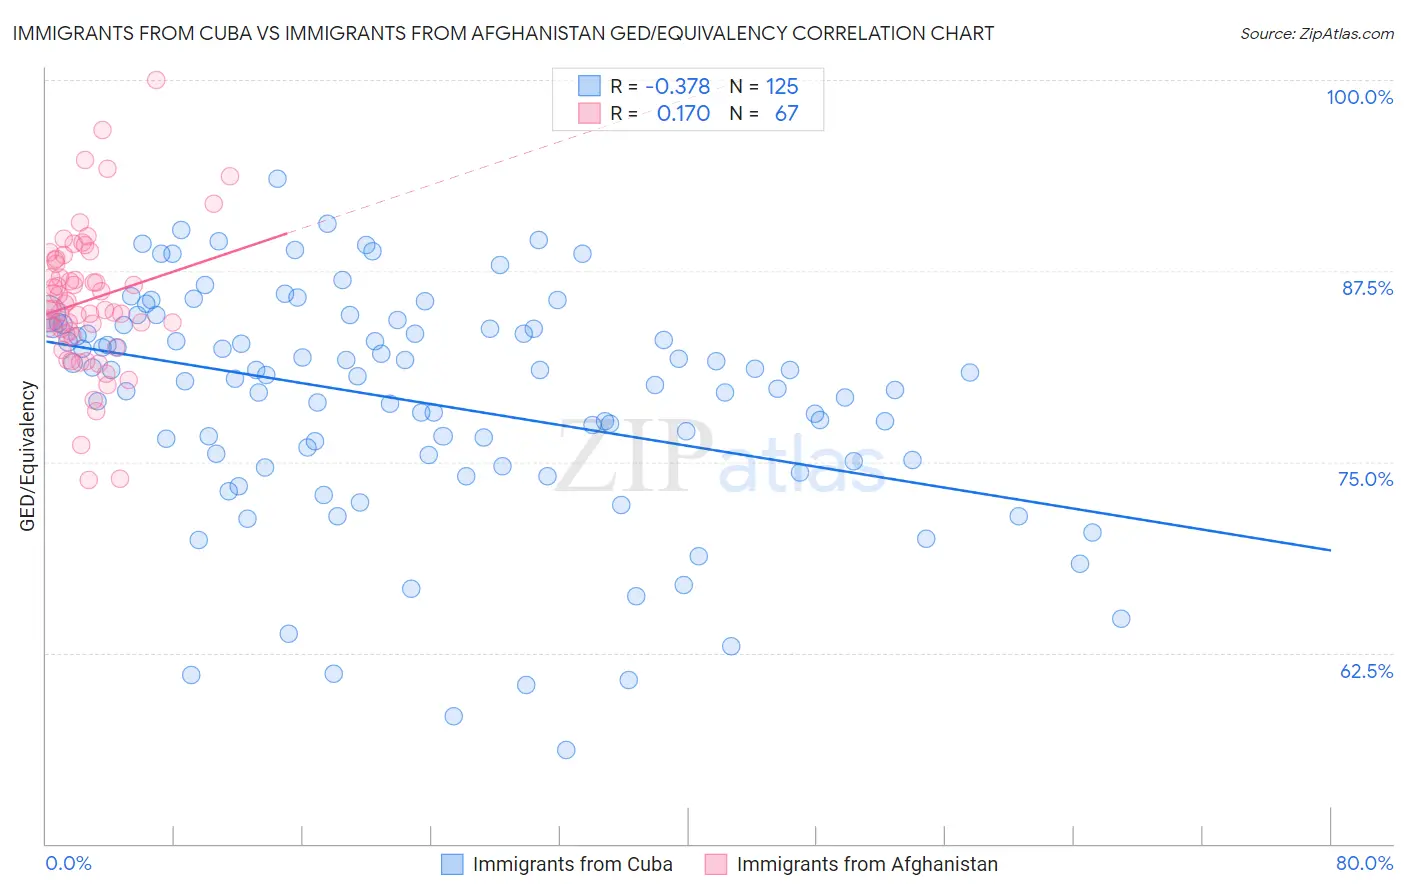 Immigrants from Cuba vs Immigrants from Afghanistan GED/Equivalency